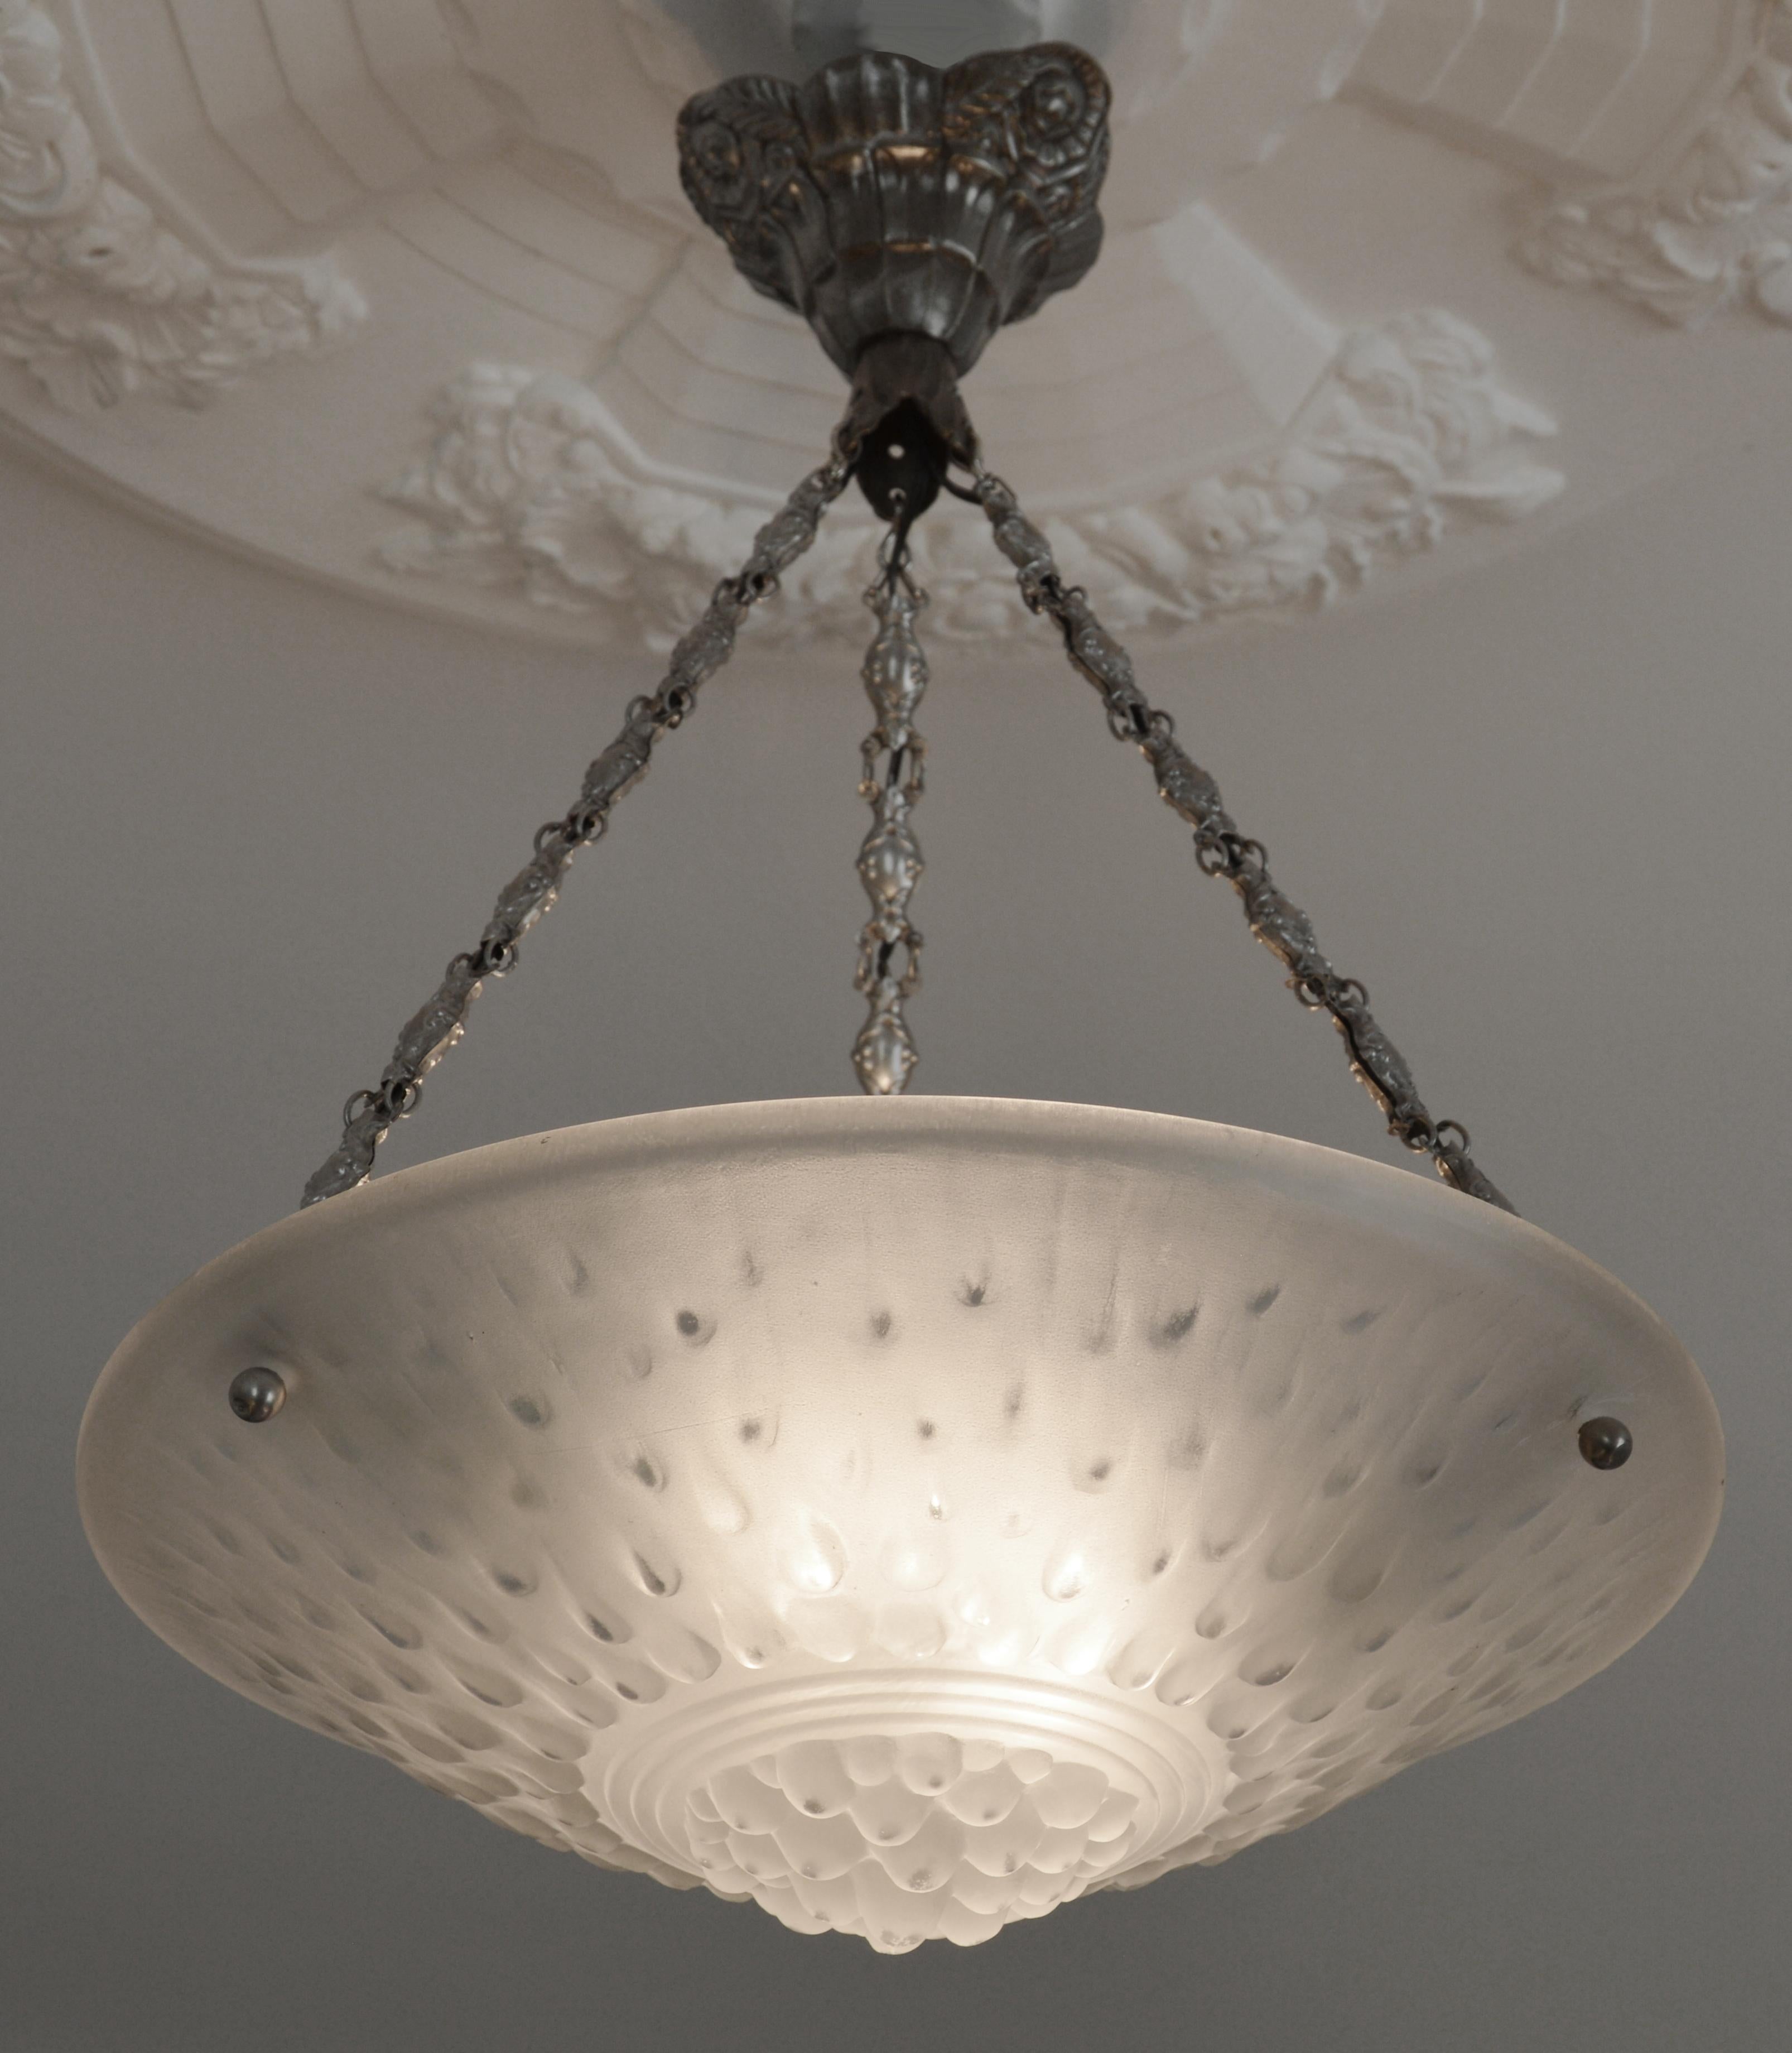 Art Deco pendant chandelier by Muller Freres (Luneville), France, 1920s. Glass, bronze and brass. White frosted molded-pressed glass shade. It comes with its nice period silver plated solid bronze (canopy) and stamped brass (chains) fixture.